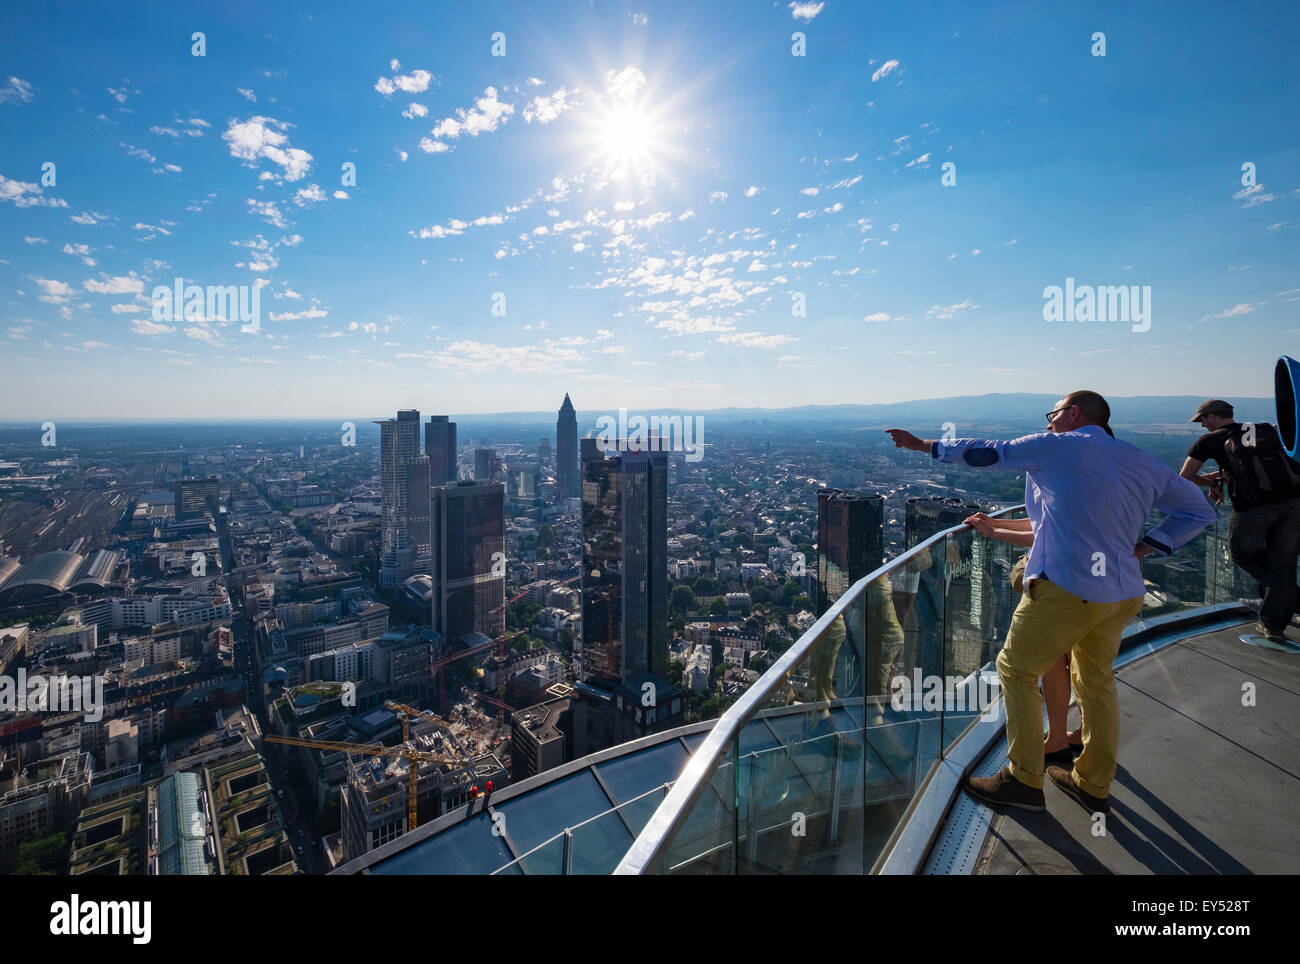 Observation deck of the Main Tower, looking west across the Financial District, Frankfurt am Main, Hesse, Germany Stock Photo